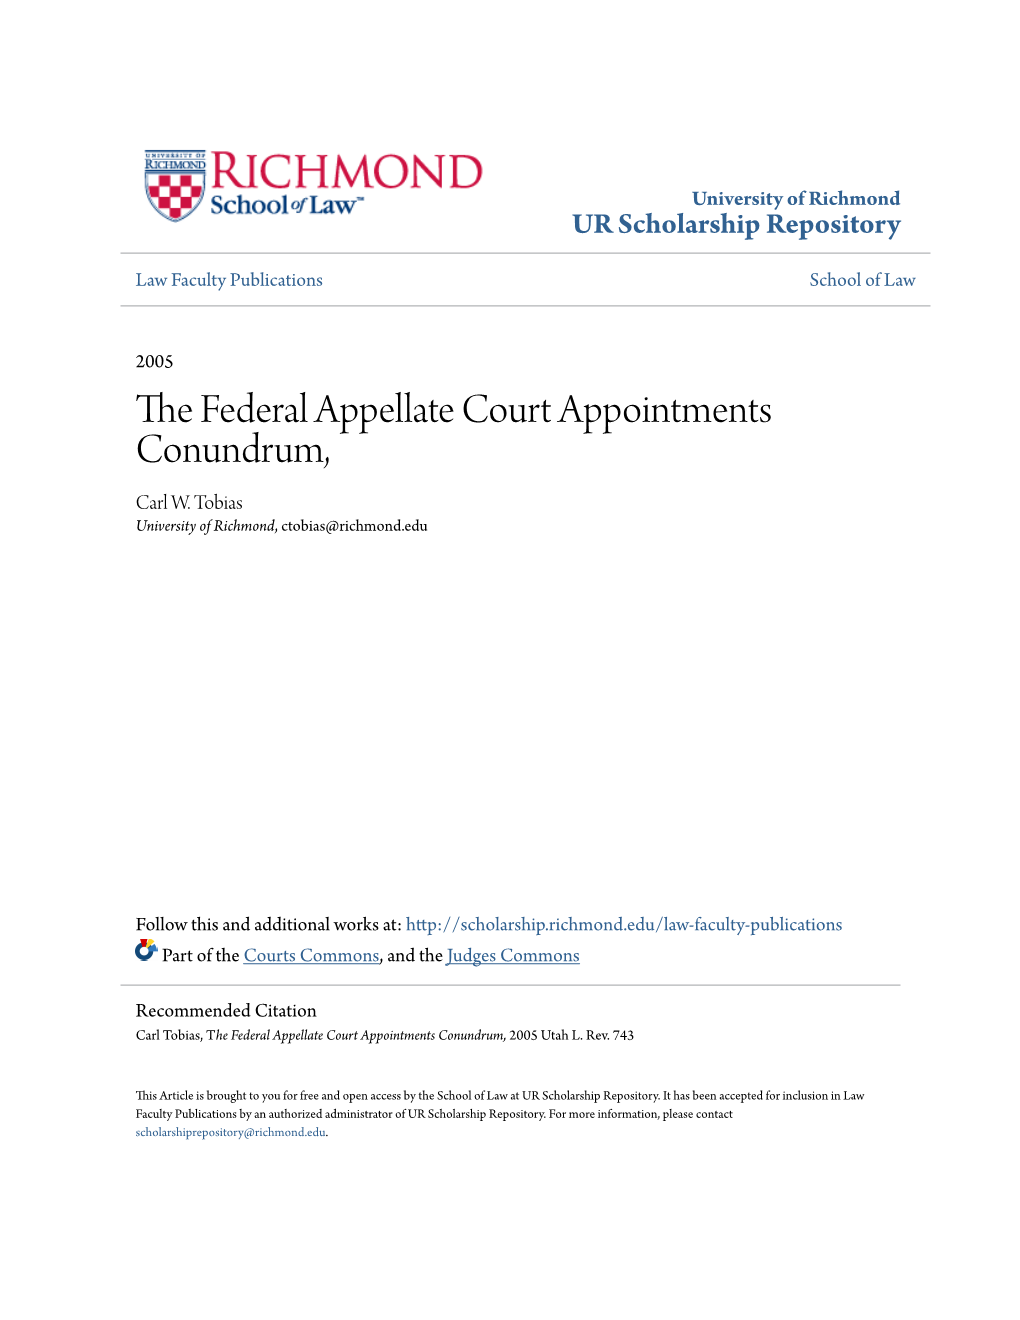 The Federal Appellate Court Appointments Conundrum, 2005 Utah L